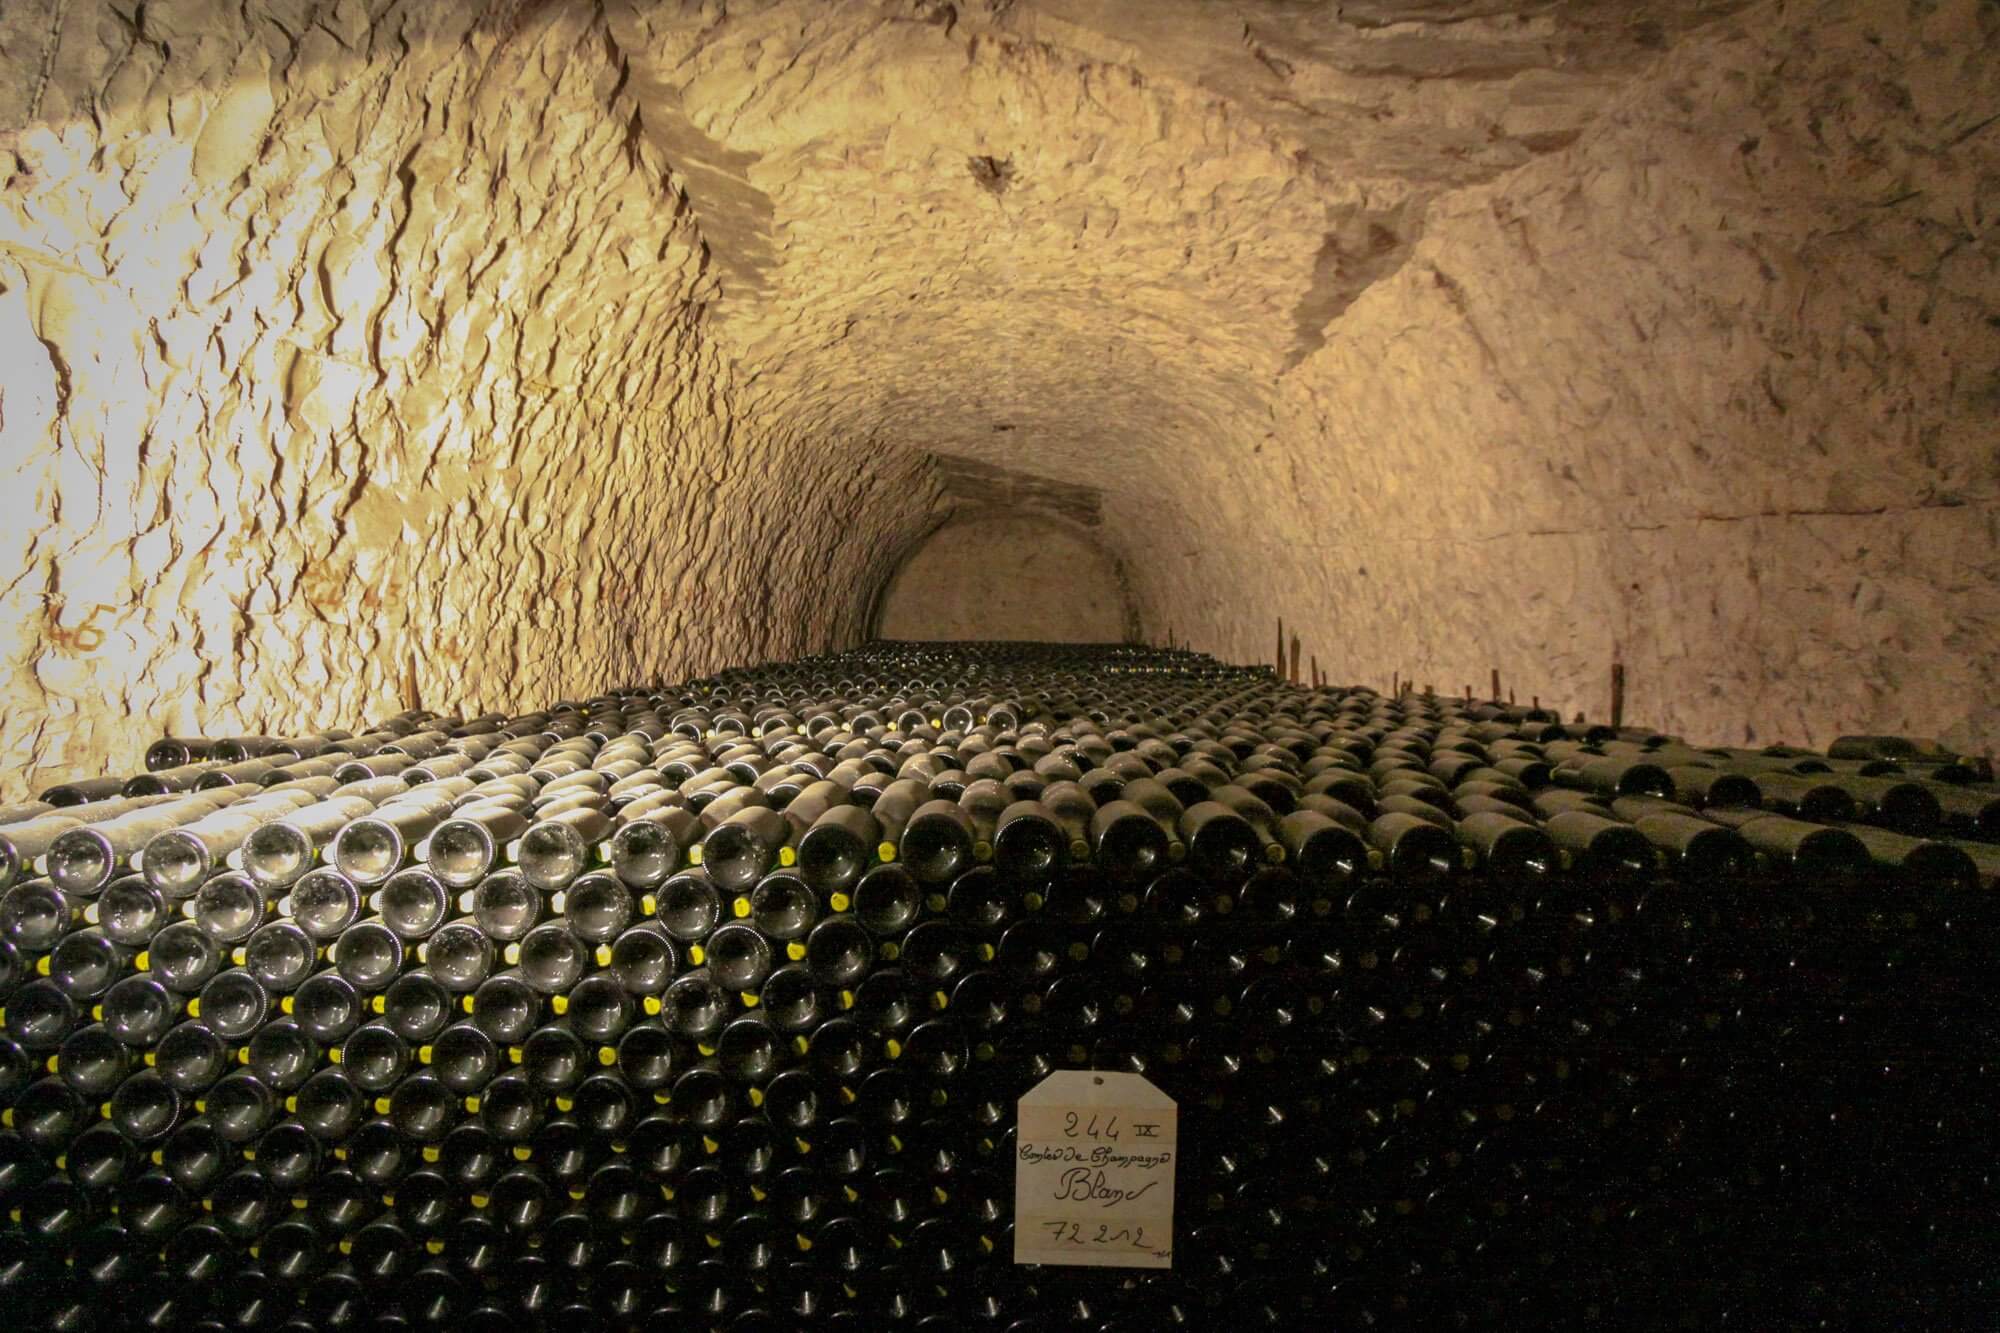 Countless bottles of champagne in the underground caves at Taittinger